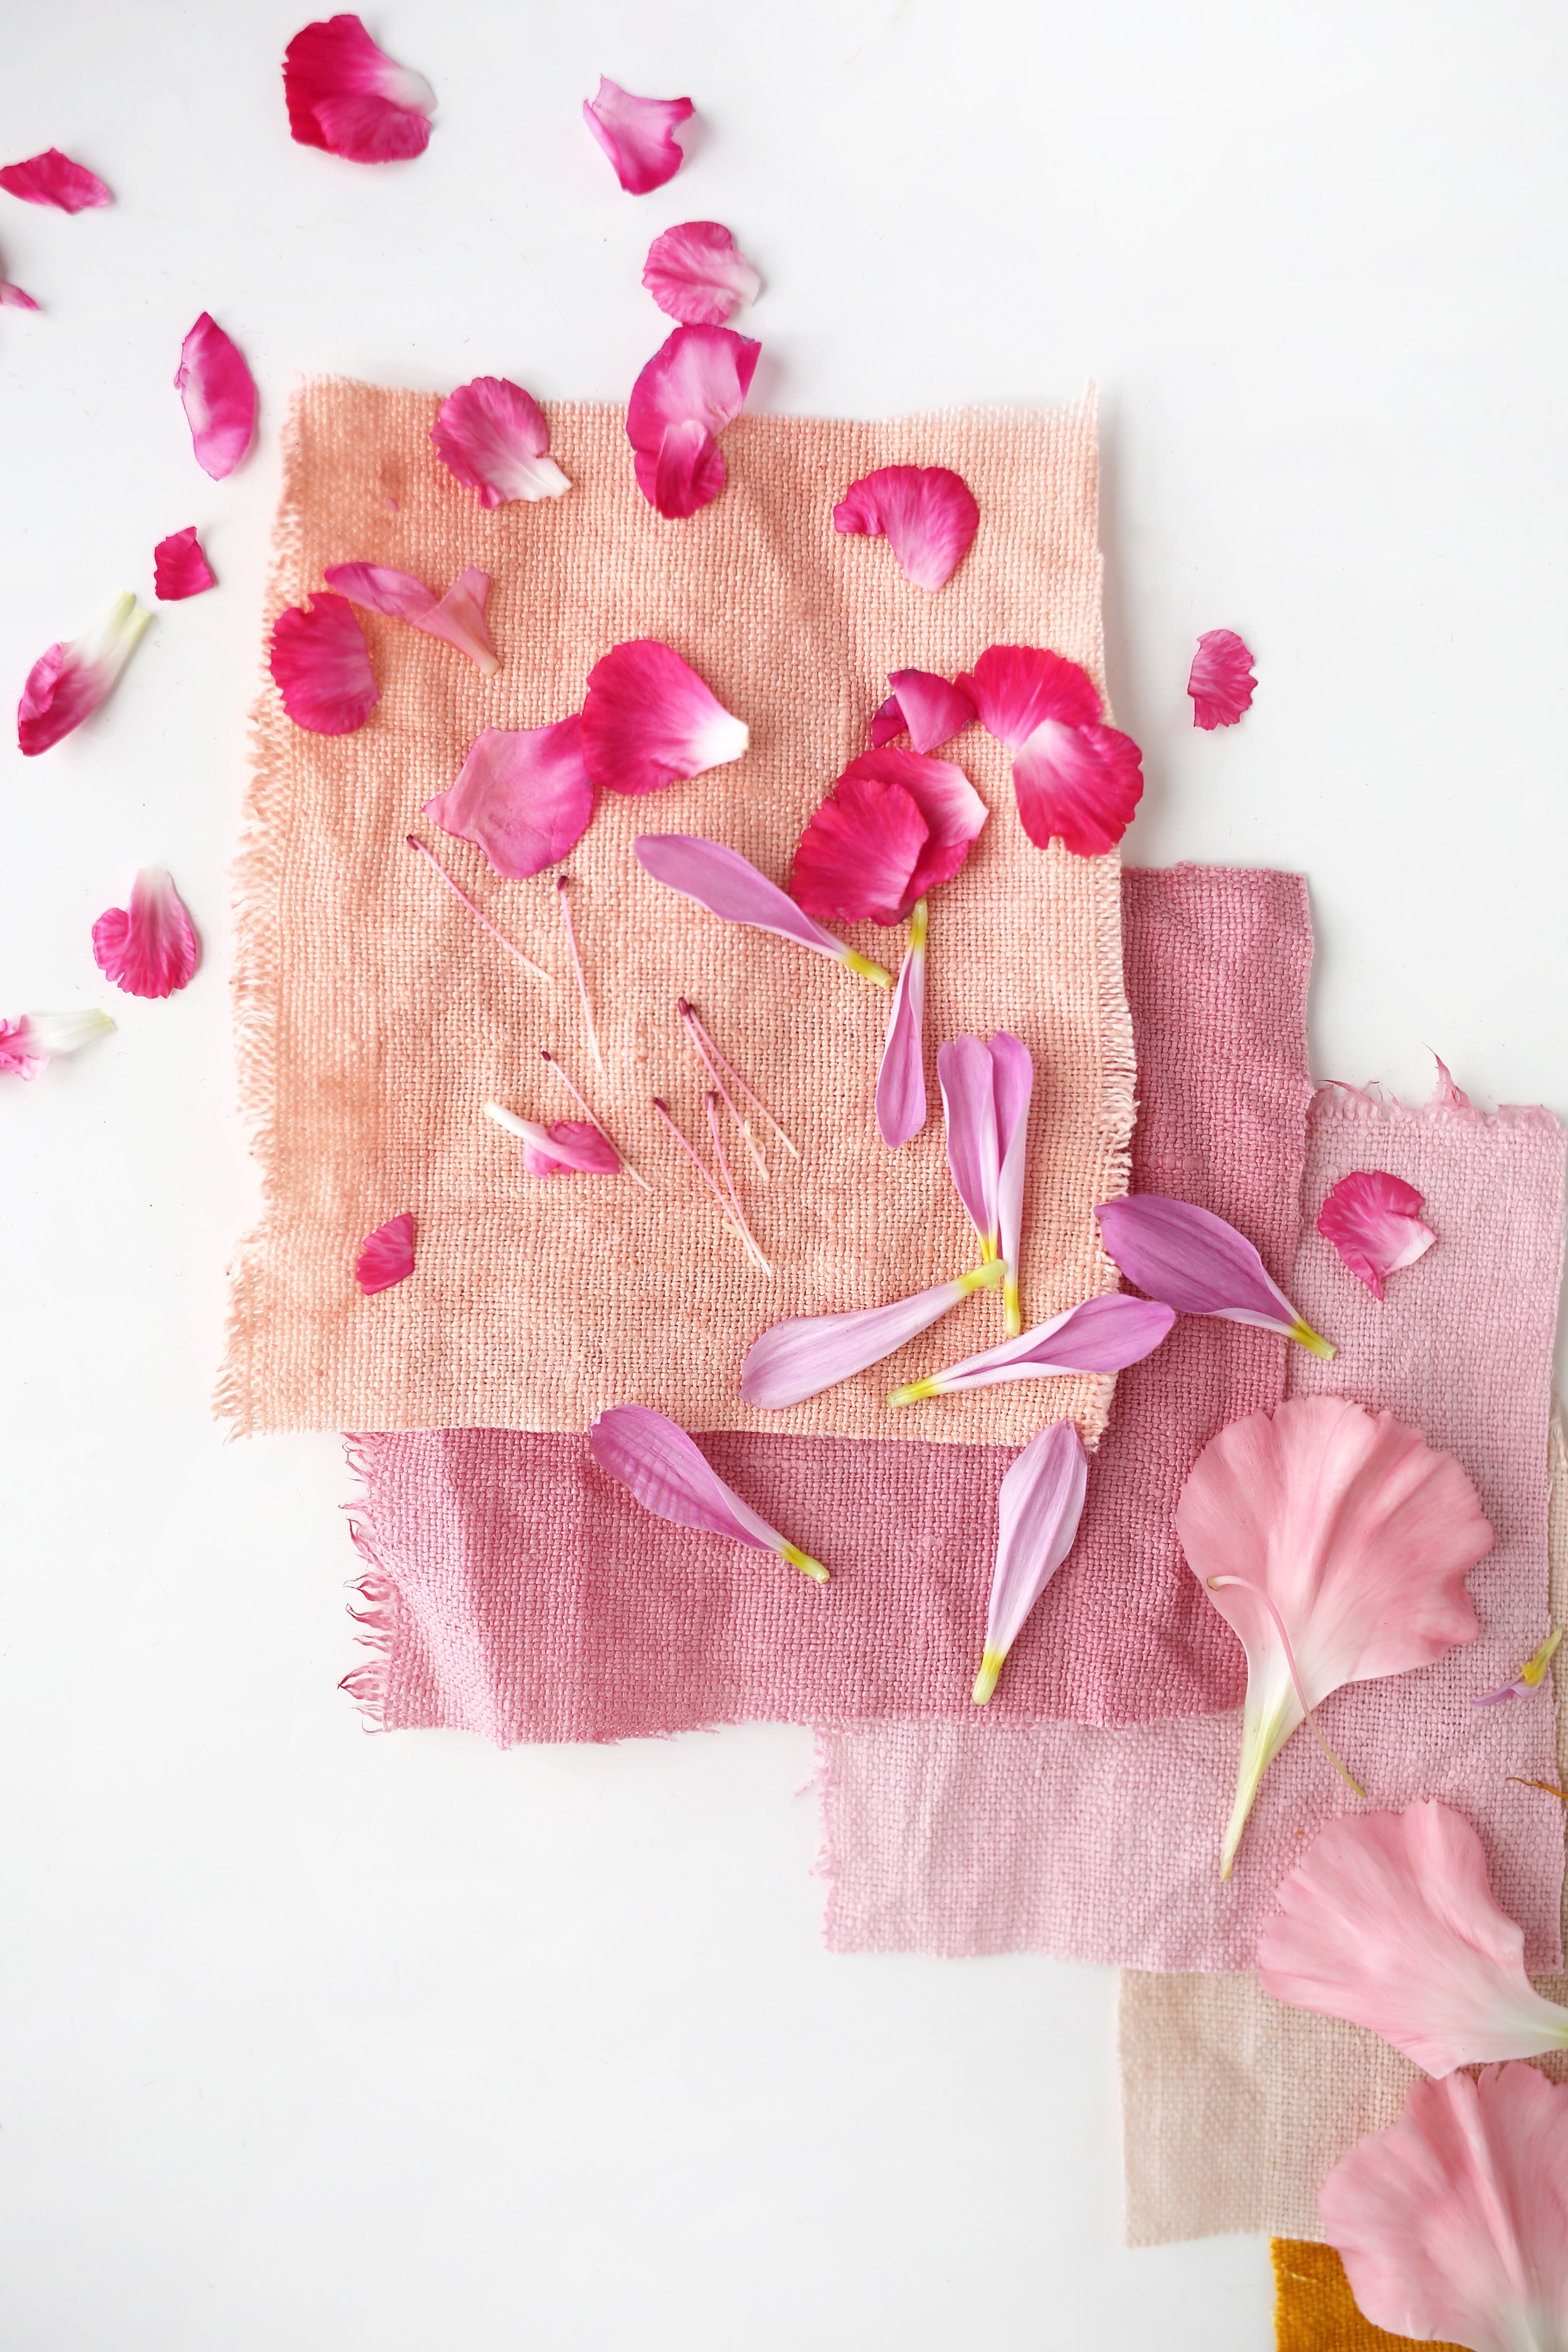 3 pink square pieces of canvas bags with flower petals on them